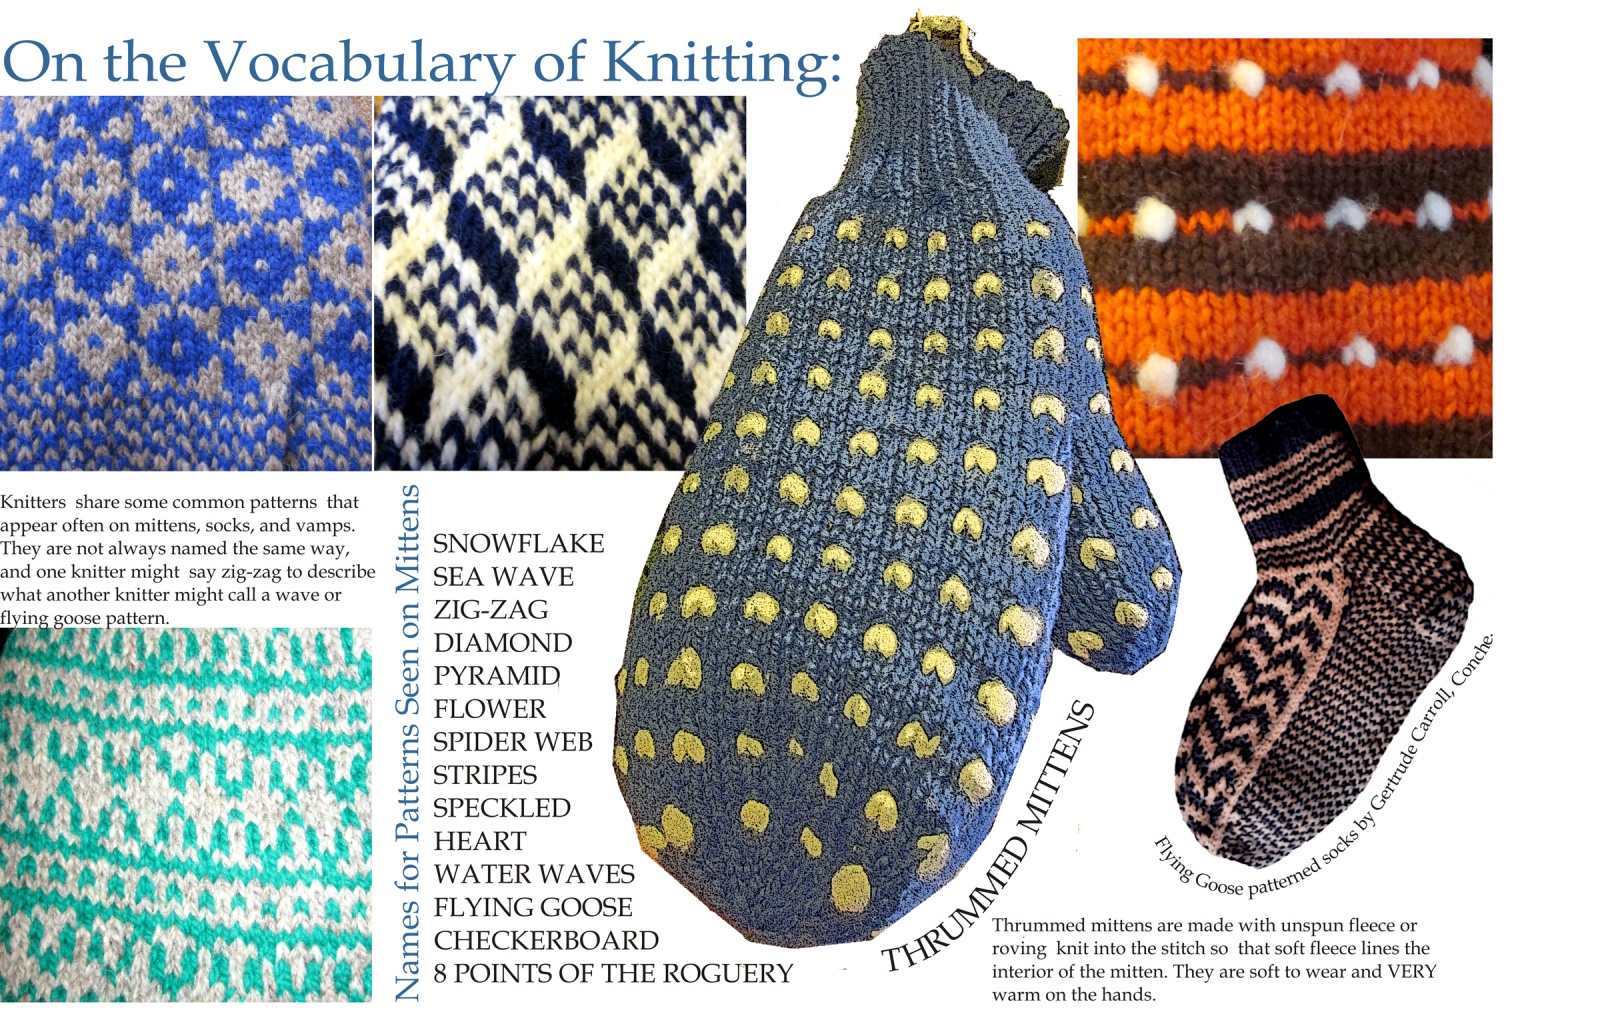 On the Vocabulary of Knitting